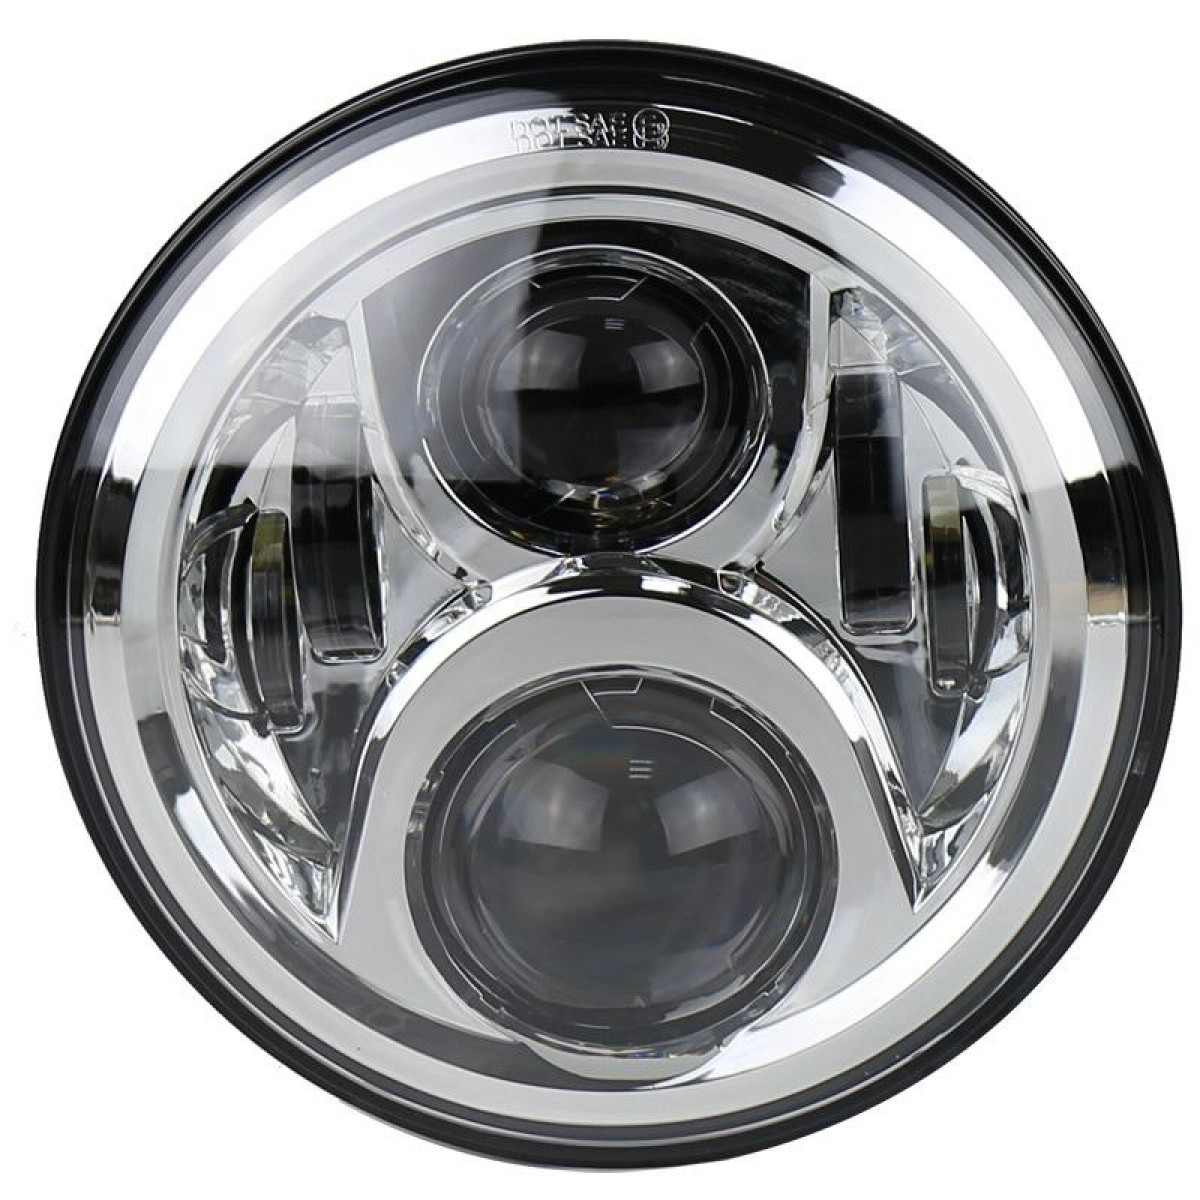 7 inch Round LED Motorcycle Headlight Modified Spotlight for Honda (Silver)